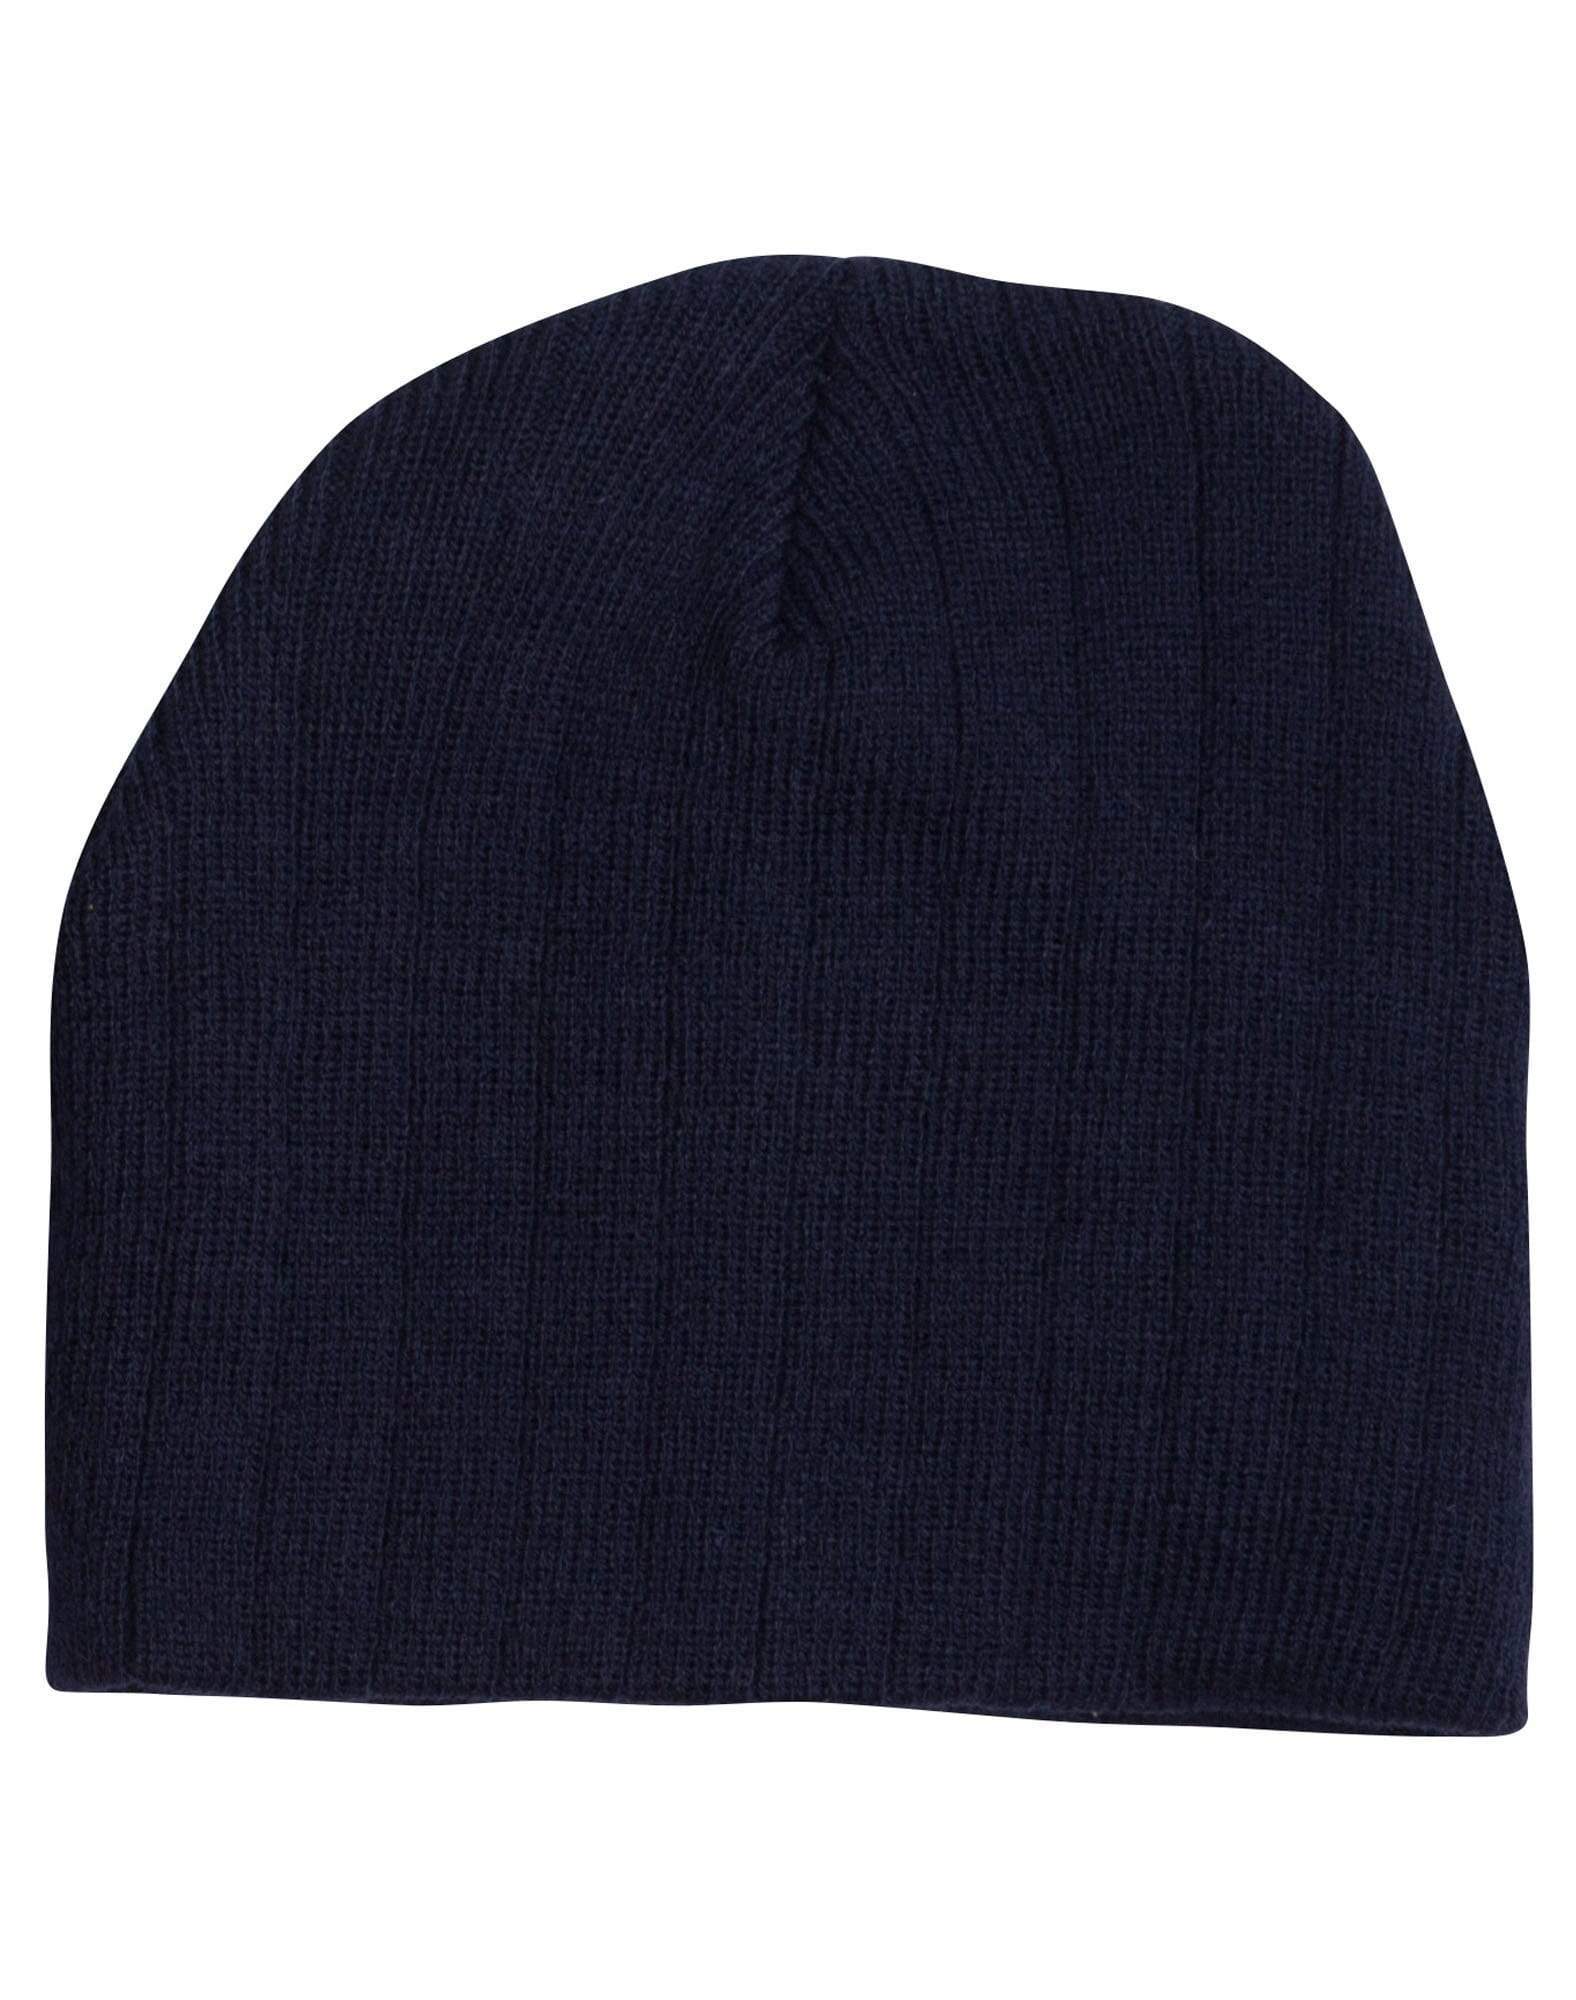 Winning Spirit Active Wear Navy / One size Cable Knit Beanie With Fleece Head BandCH64